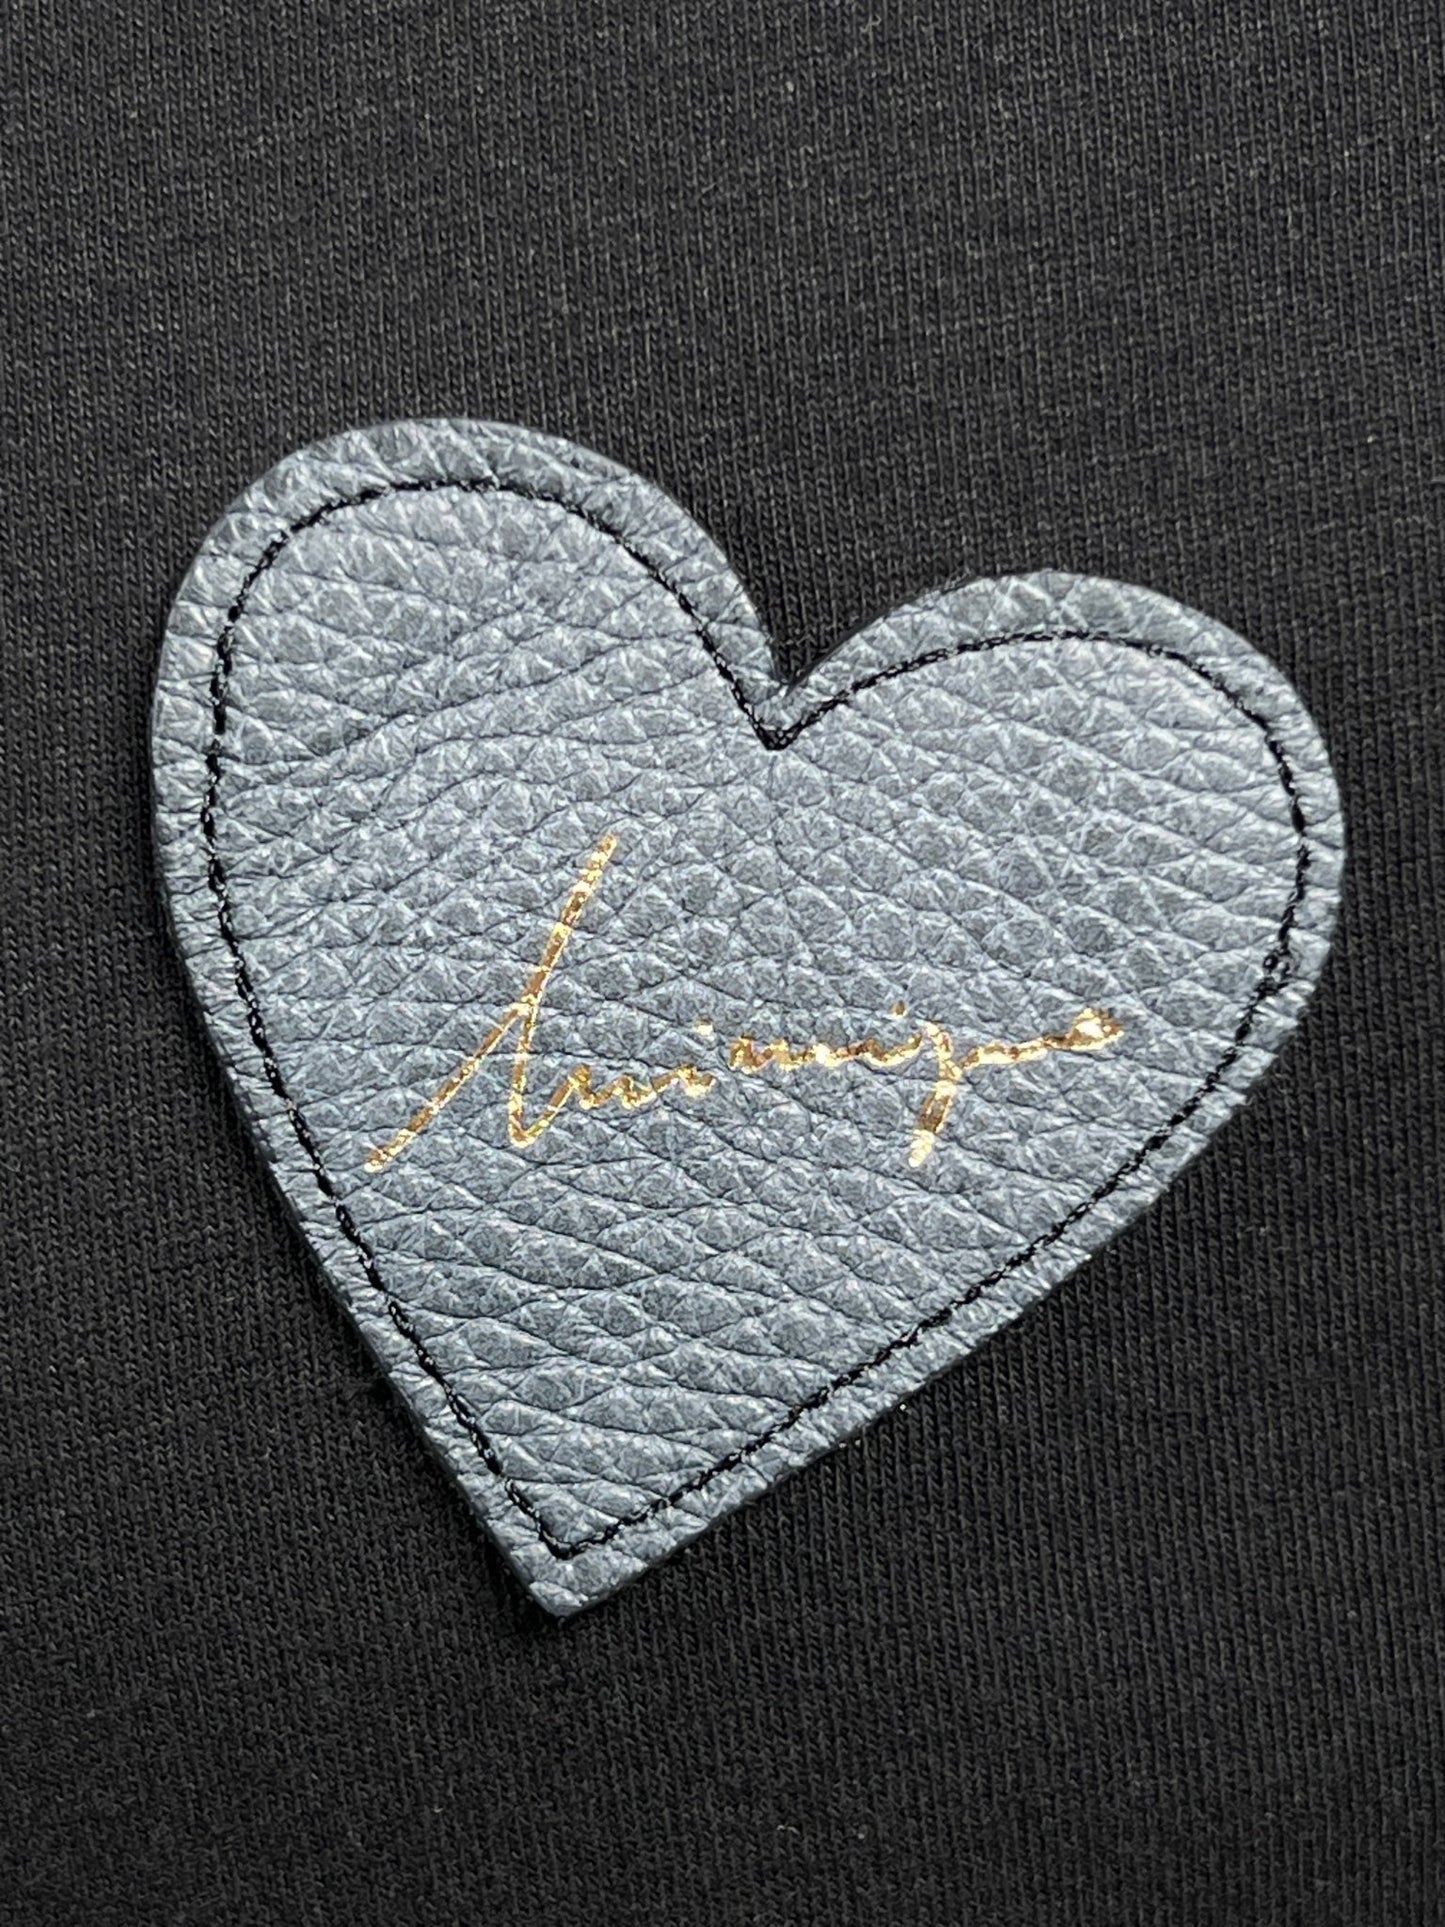 A grey heart-shaped leather detail with gold cursive writing adorns the black fabric of this INIMIGO ITS3508 HEART PATCH T-SHIRT BLACK, which is made from 100% cotton.